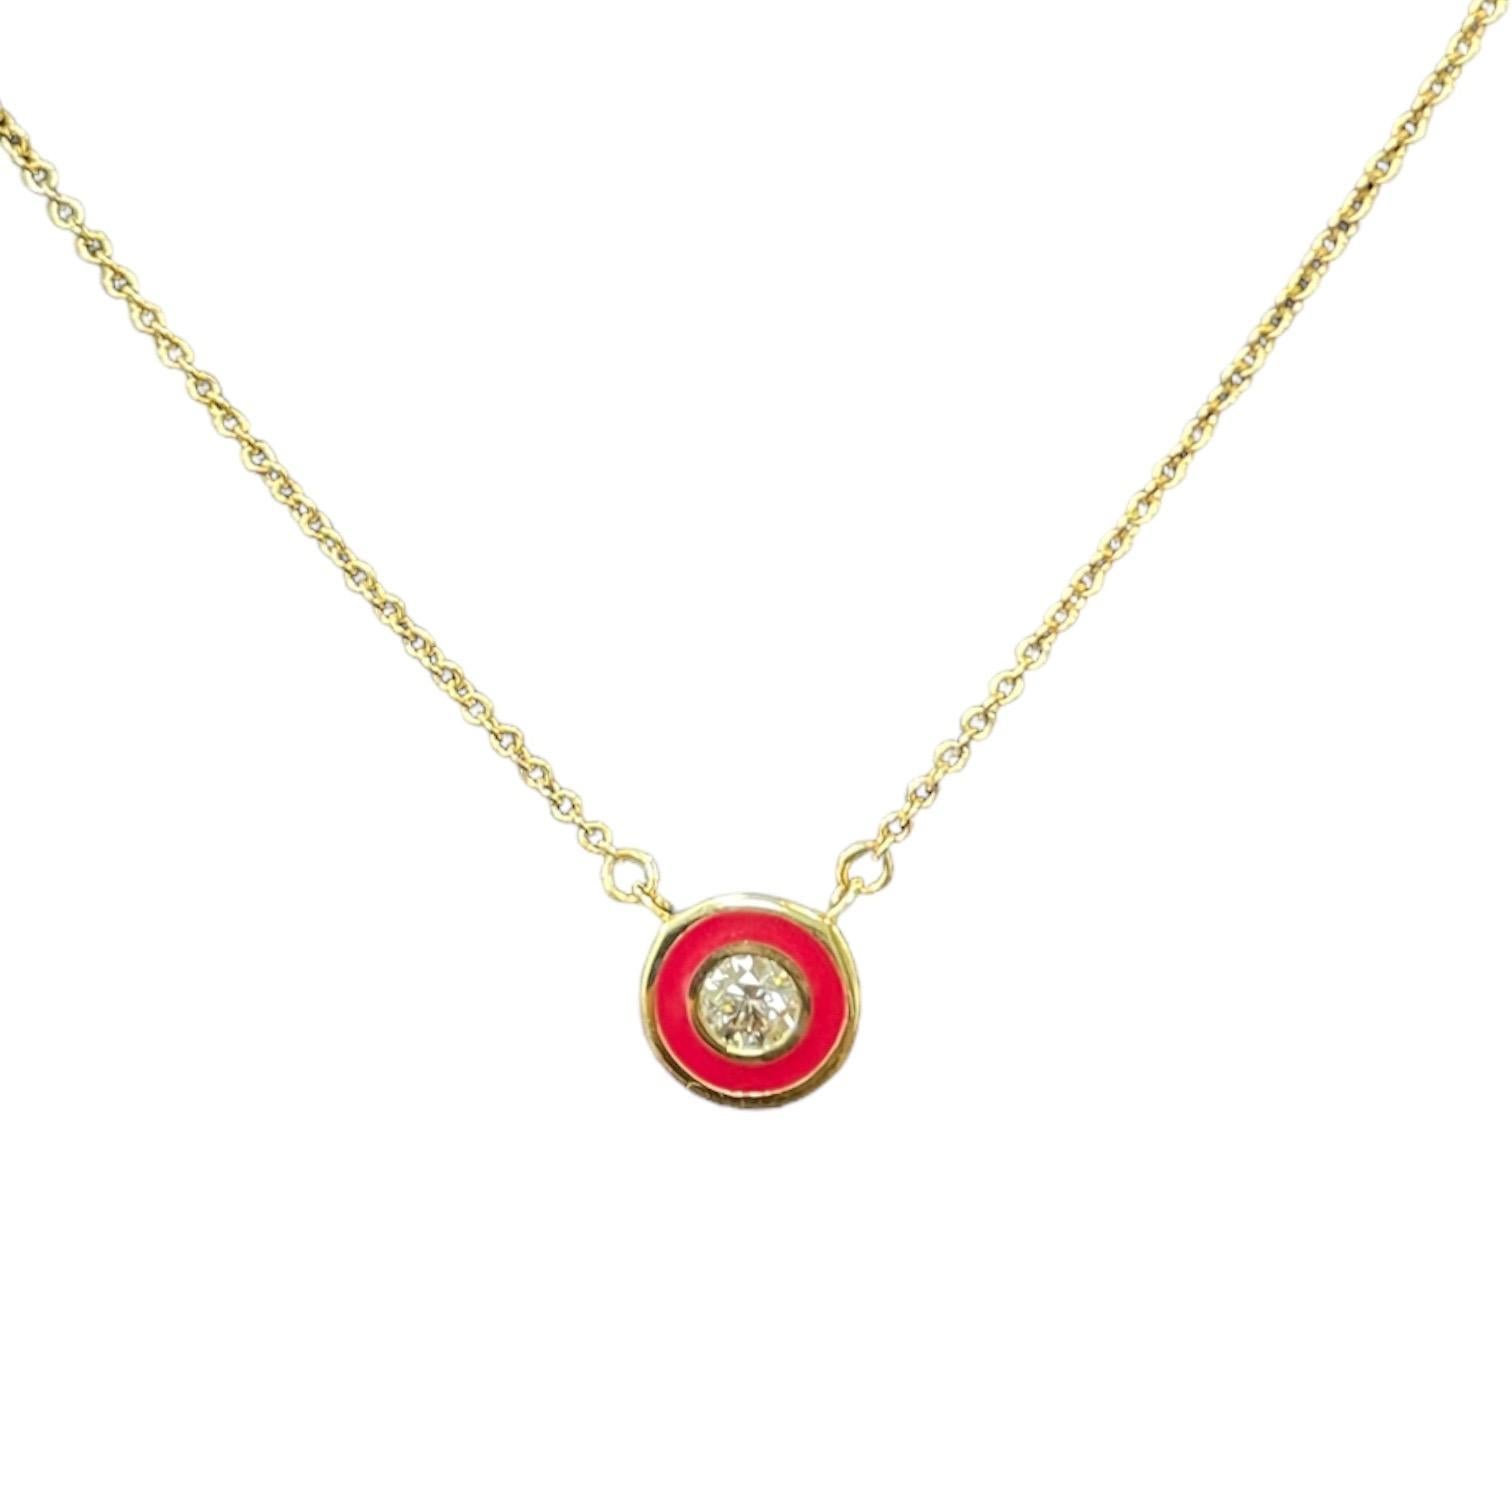 Enhance your jewelry collection with our exquisite 14K Yellow Gold Round Necklace, featuring a striking red enamel pendant. This sophisticated piece is adorned with a radiant diamond, boasting a total carat weight of 0.13, making it an eye-catching